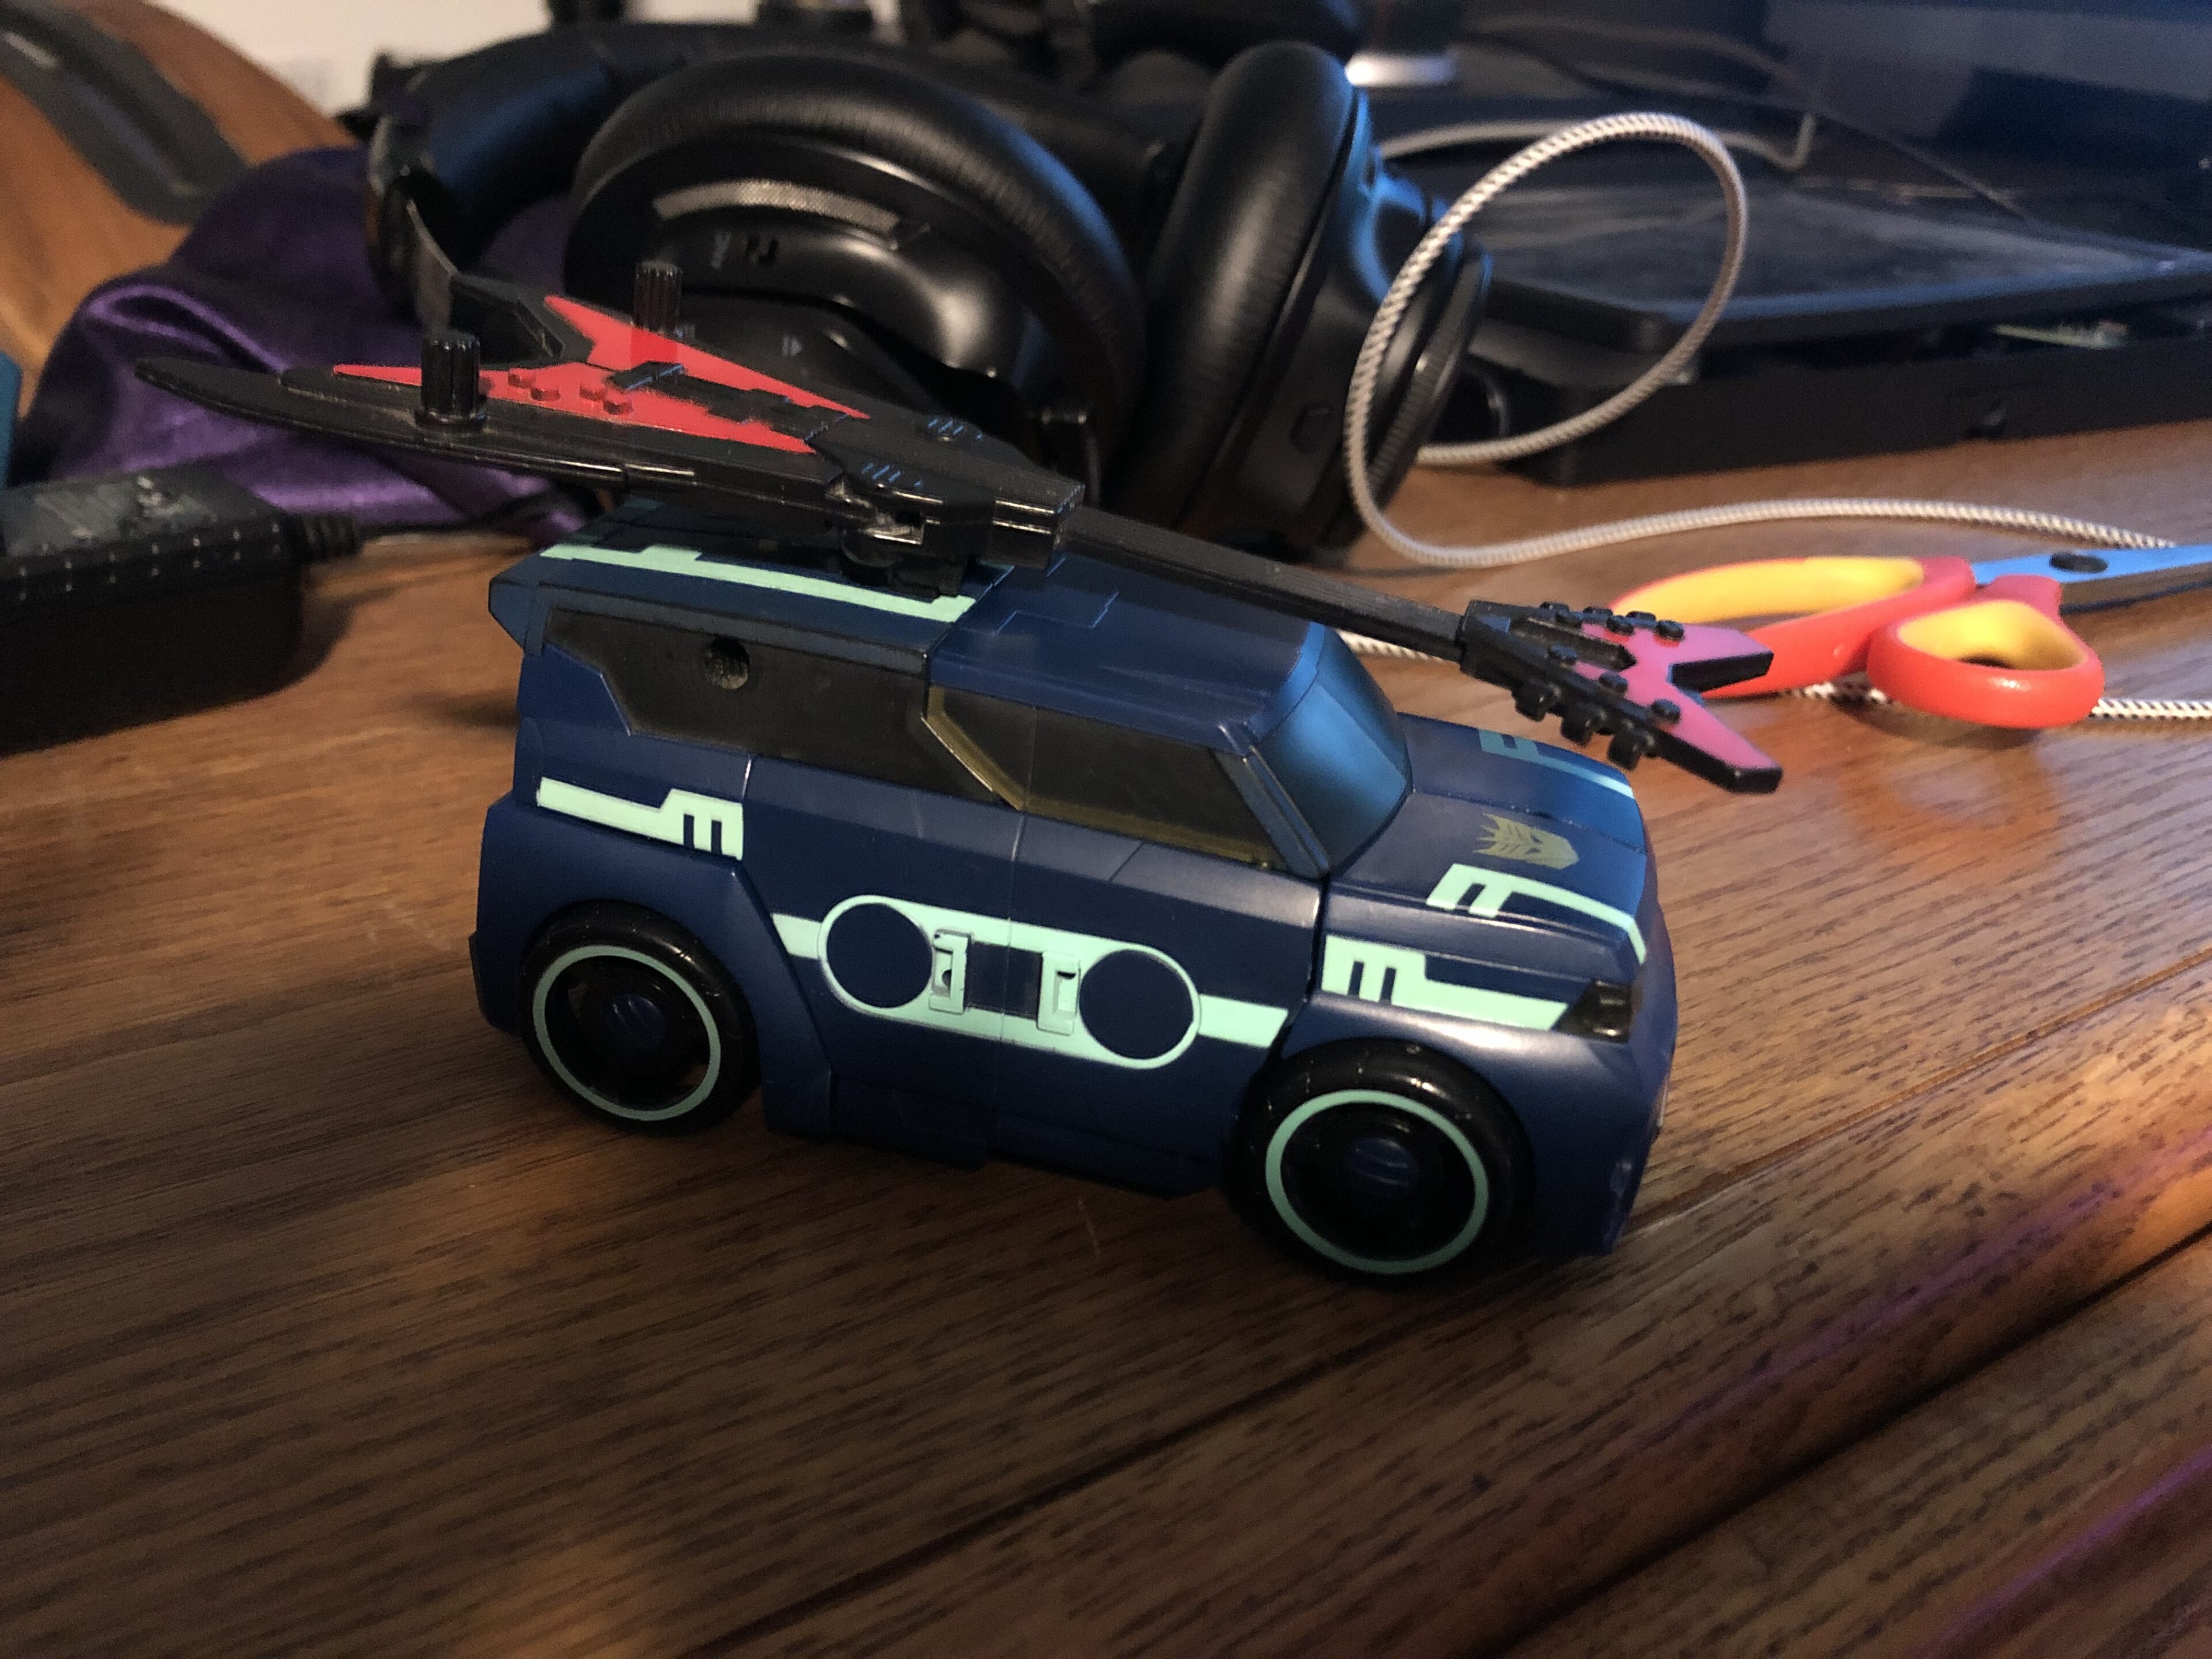 Animated Soundwave in vehicle mode